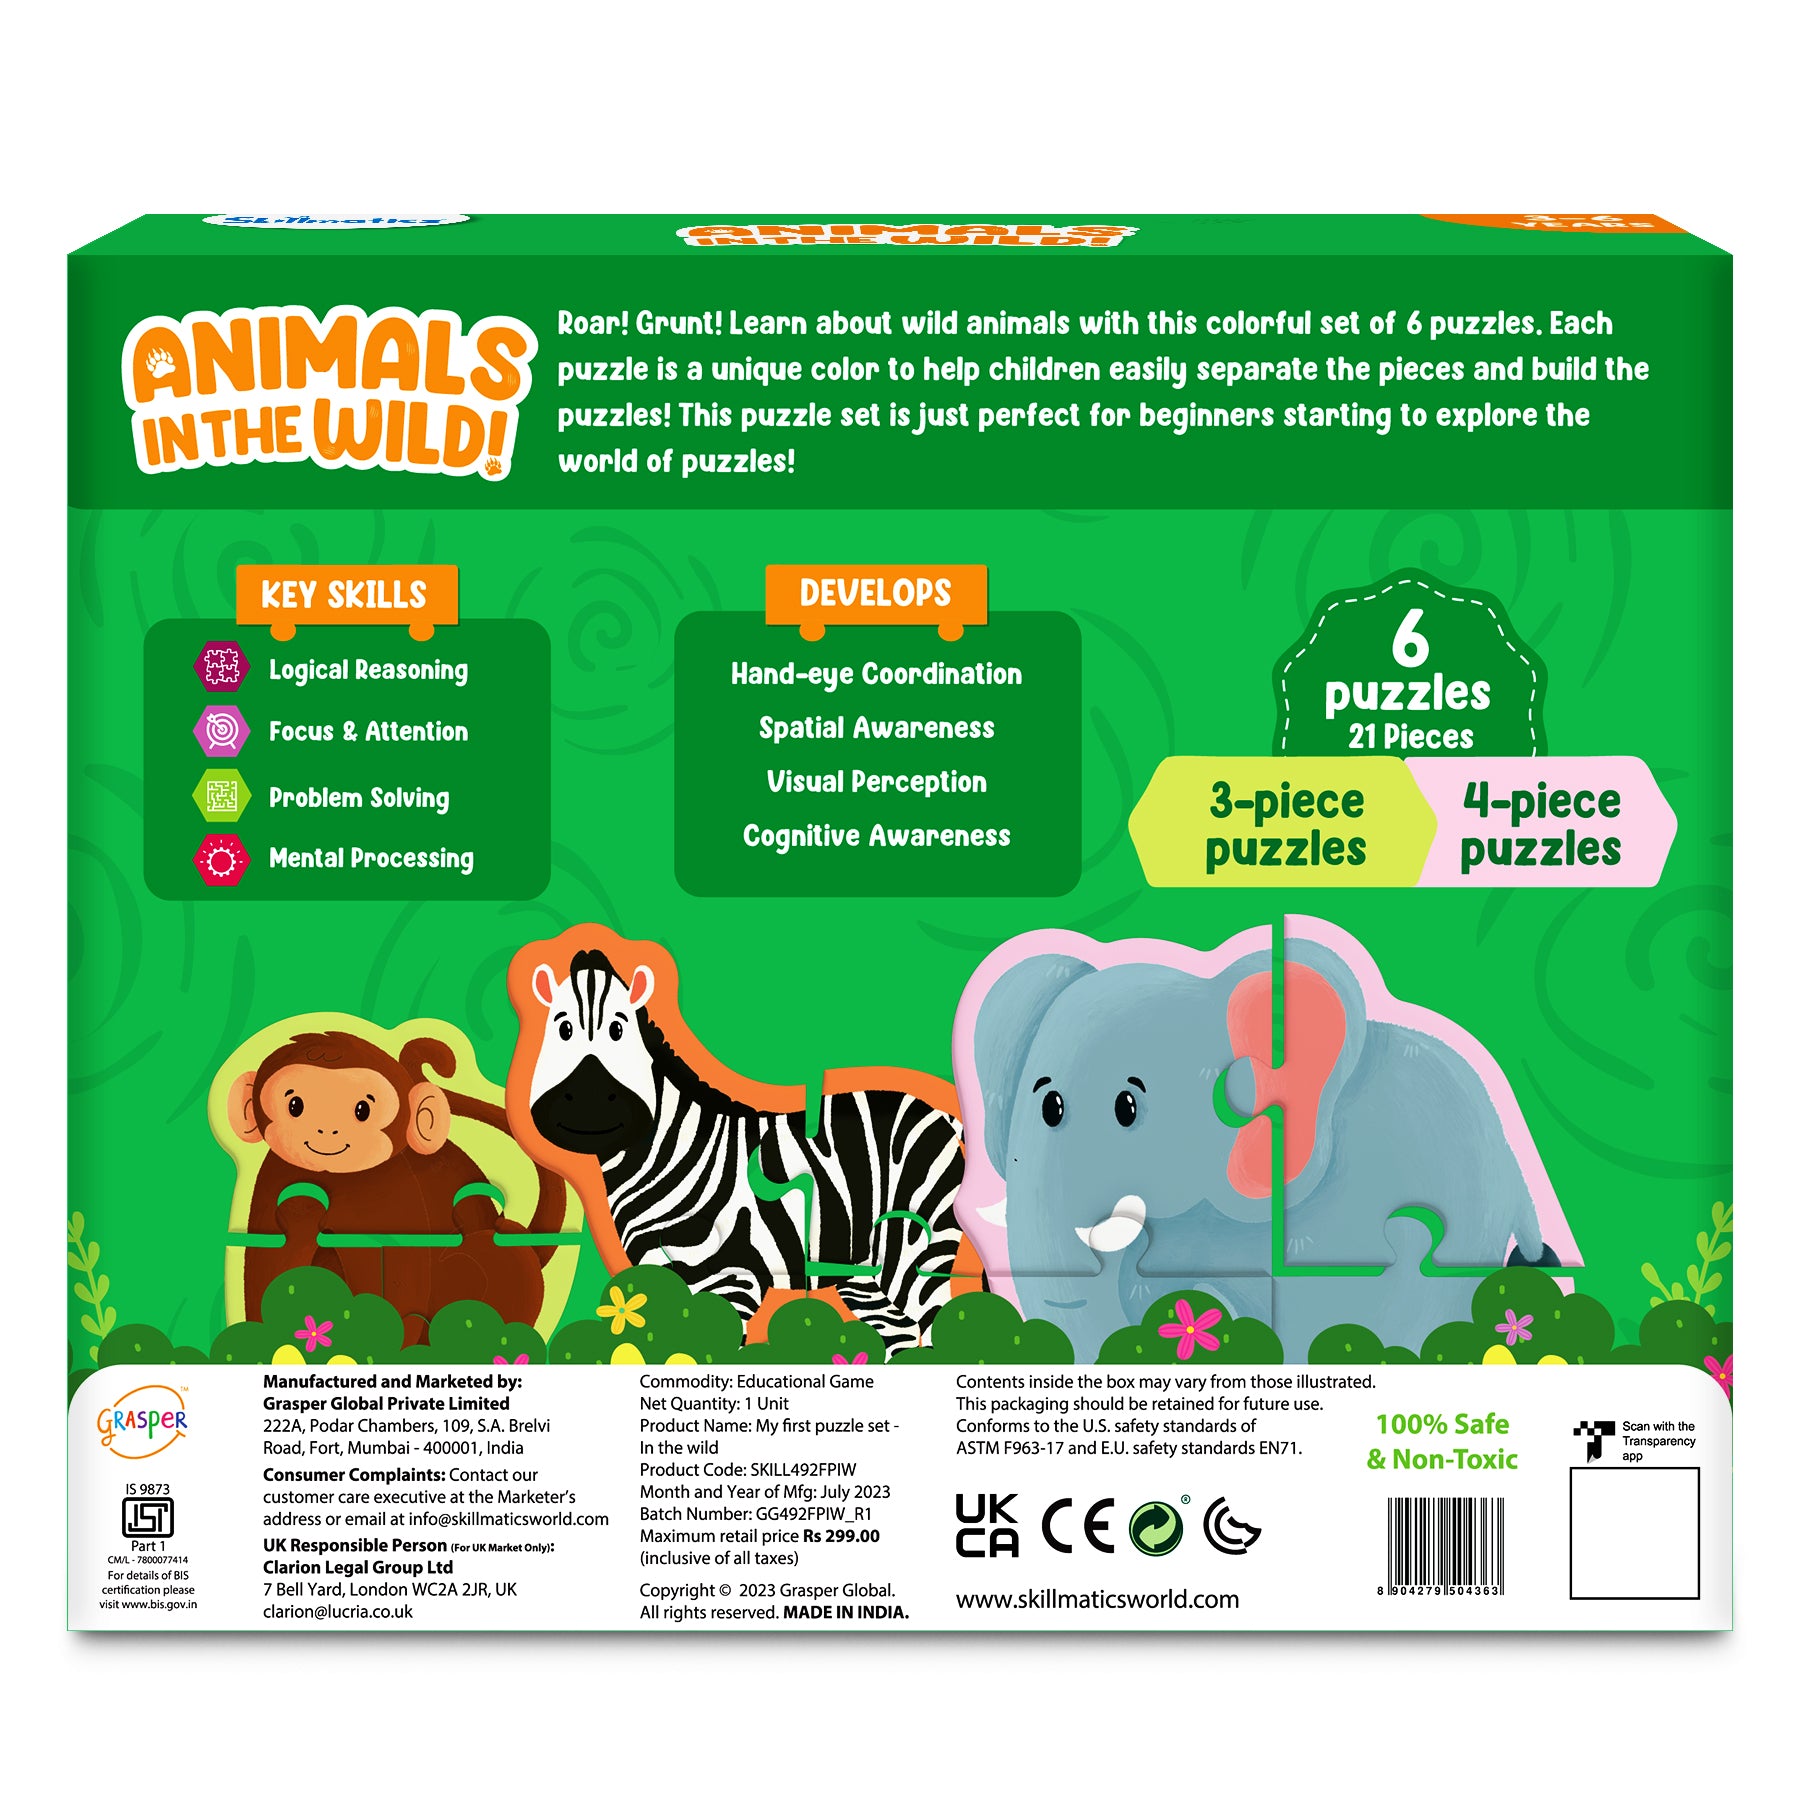 Skillmatics My First Puzzle Set - 21 Piece Wild Animal Jigsaw Puzzles, Educational Toddler Toy, Gifts For Kids Ages 3 To 6